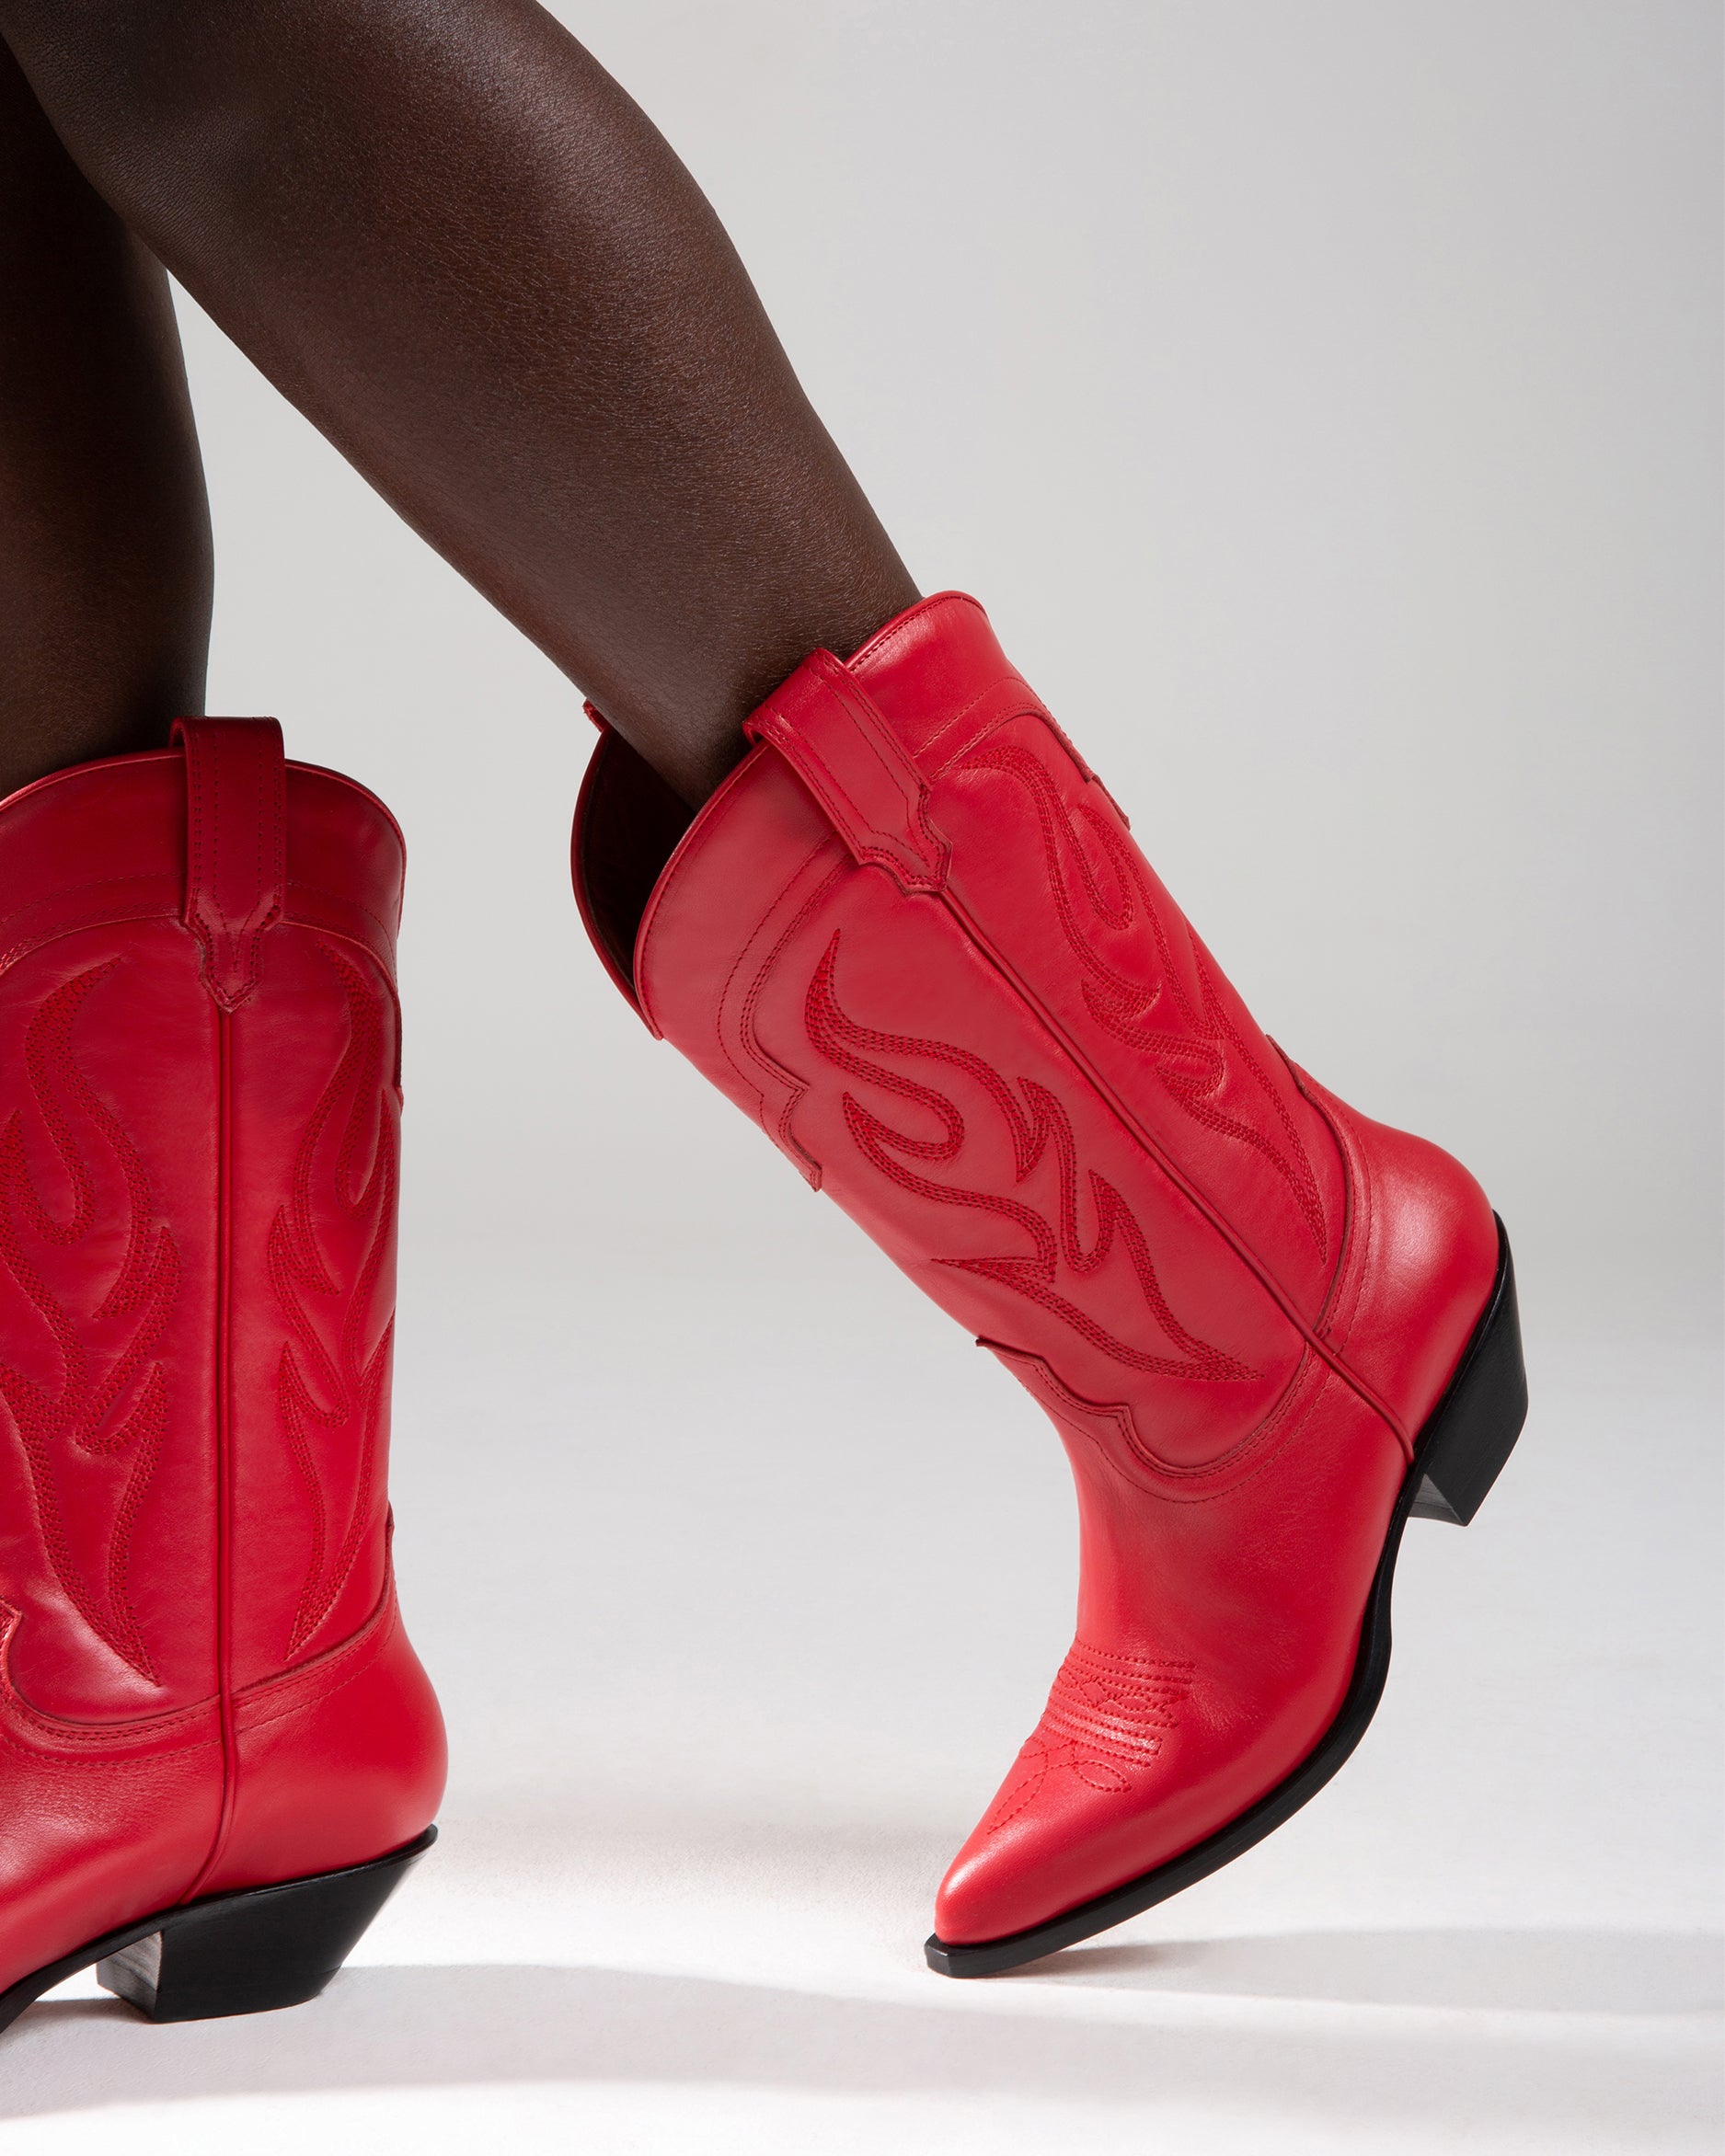 Santafe Women's Cowboy Boots in Red Sonora Calfskin | On tone embroidery 05